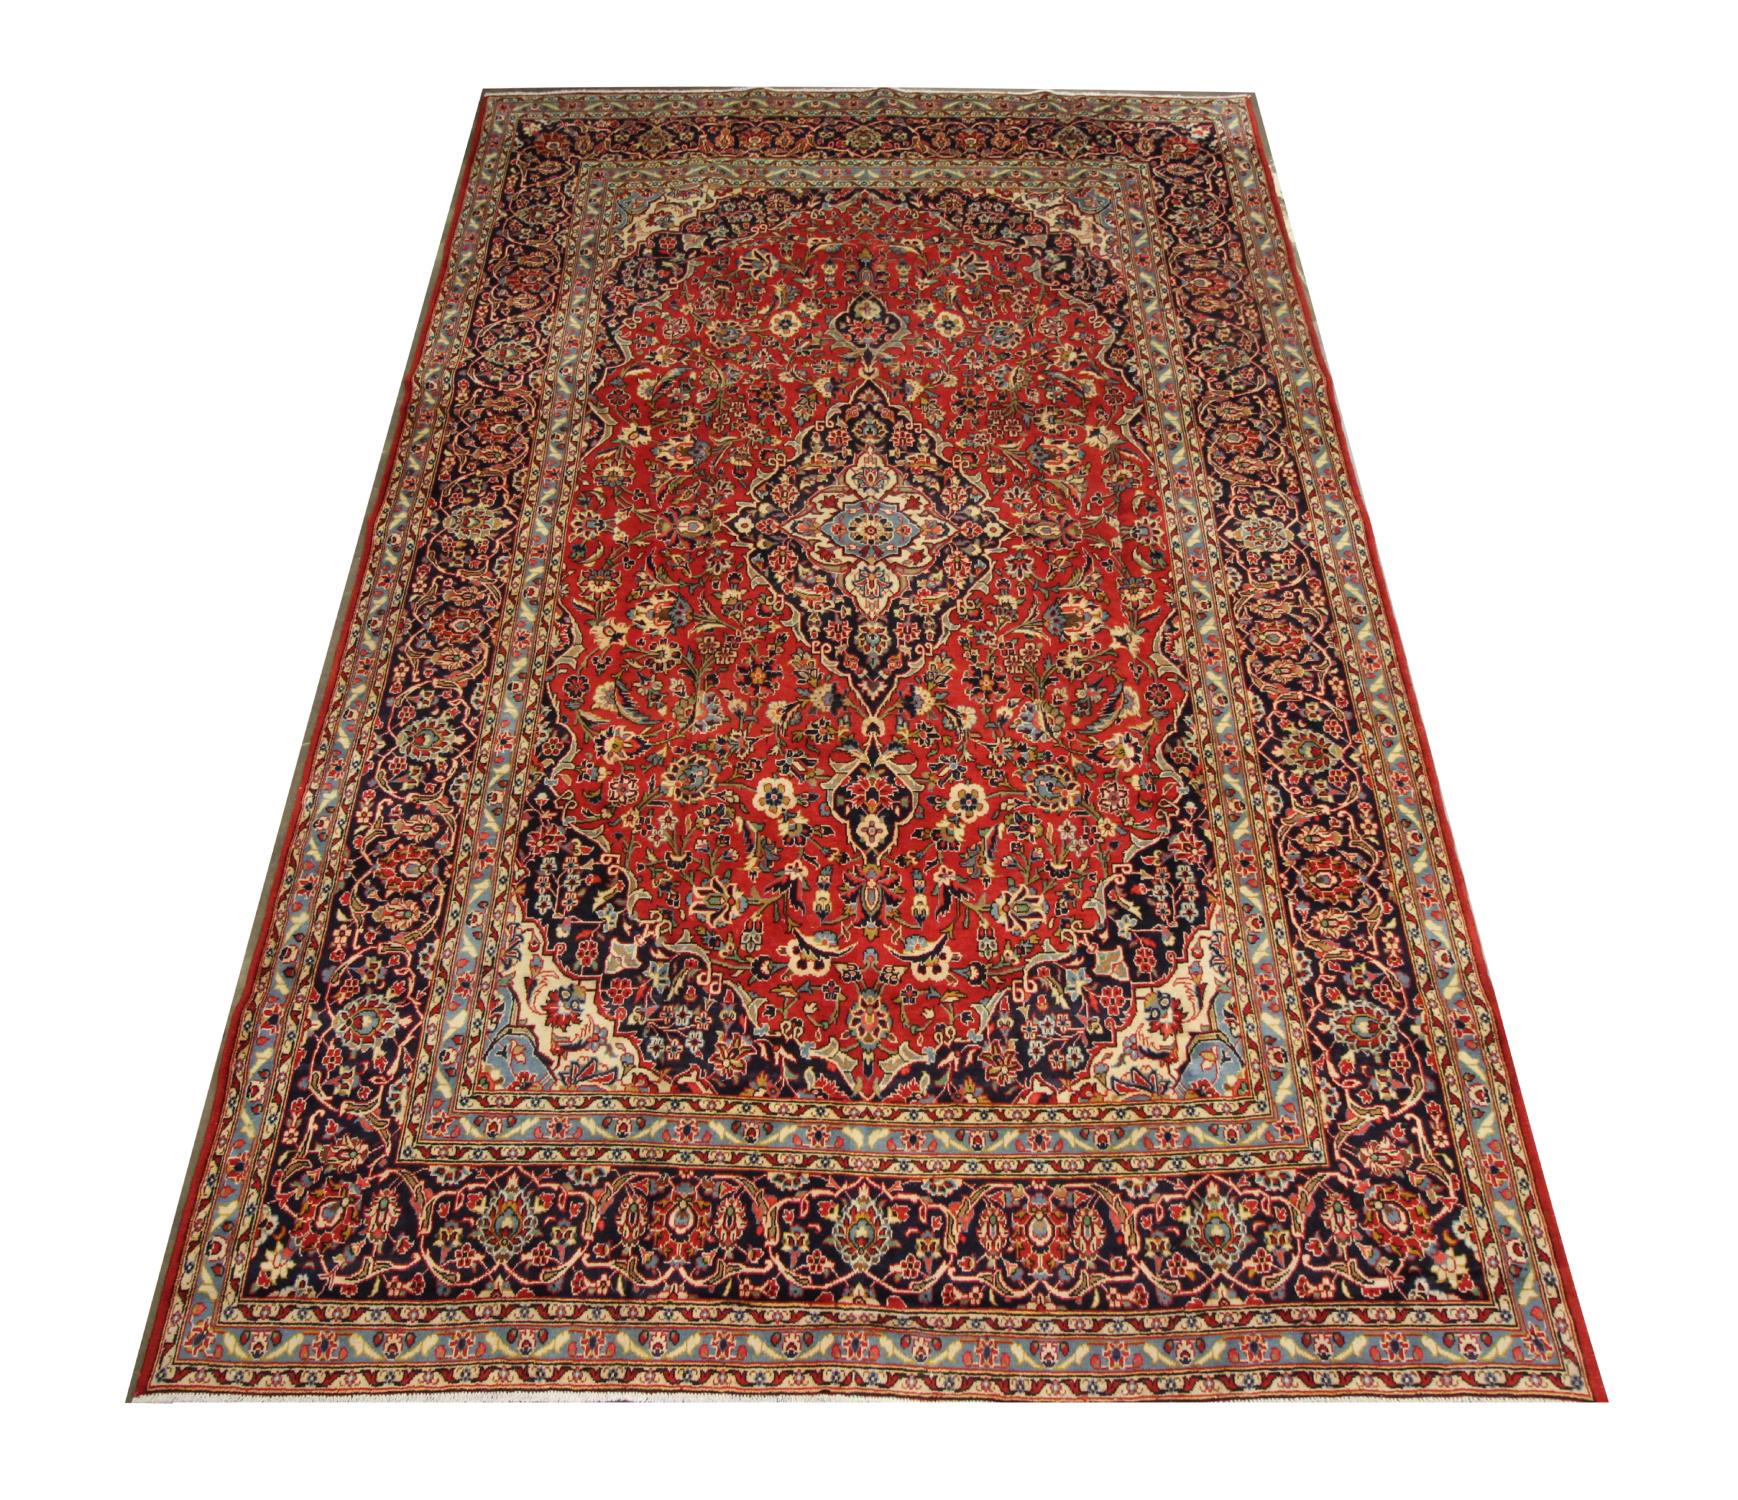 This large oriental carpet is a wonderful example of Turkish carpets woven in the late 20th century. The central design has been woven on a rich red field with deep blue, green, beige and rust accents that make up the decorative medallion and floral